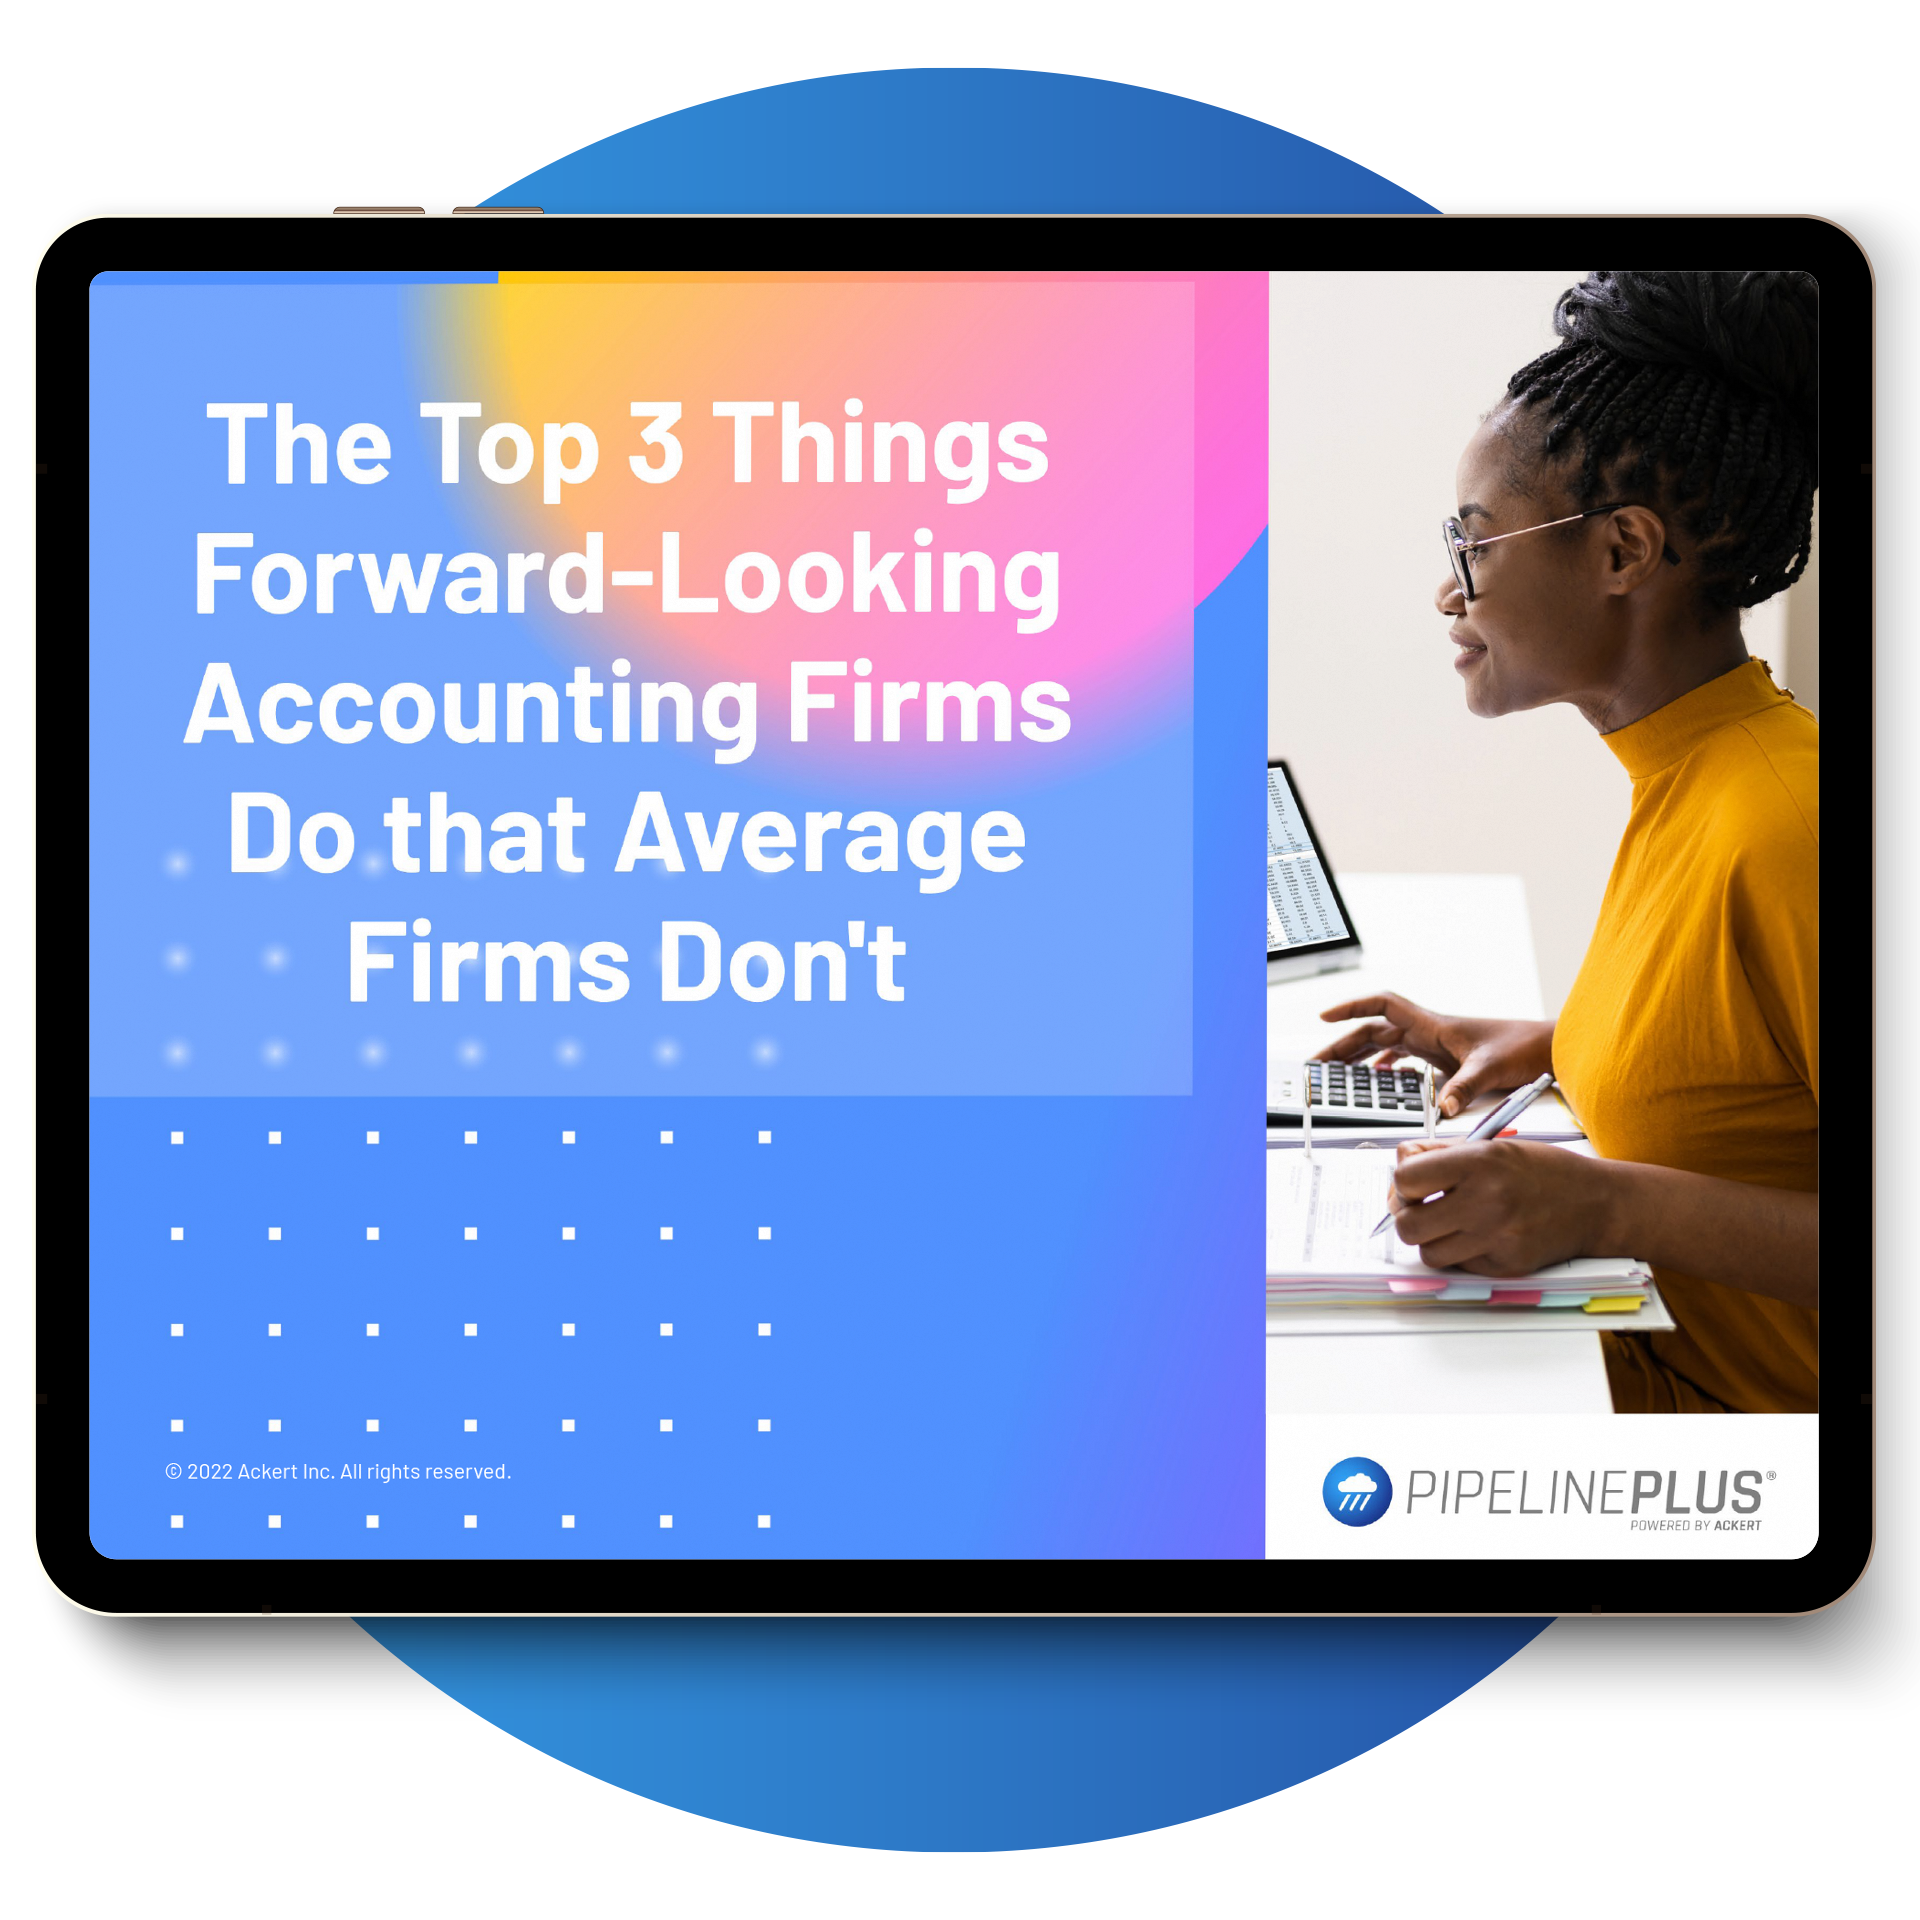 Free Guide Download | The Top 3 Things Forward-Looking Accounting Firms Do that Average Firms Don’t